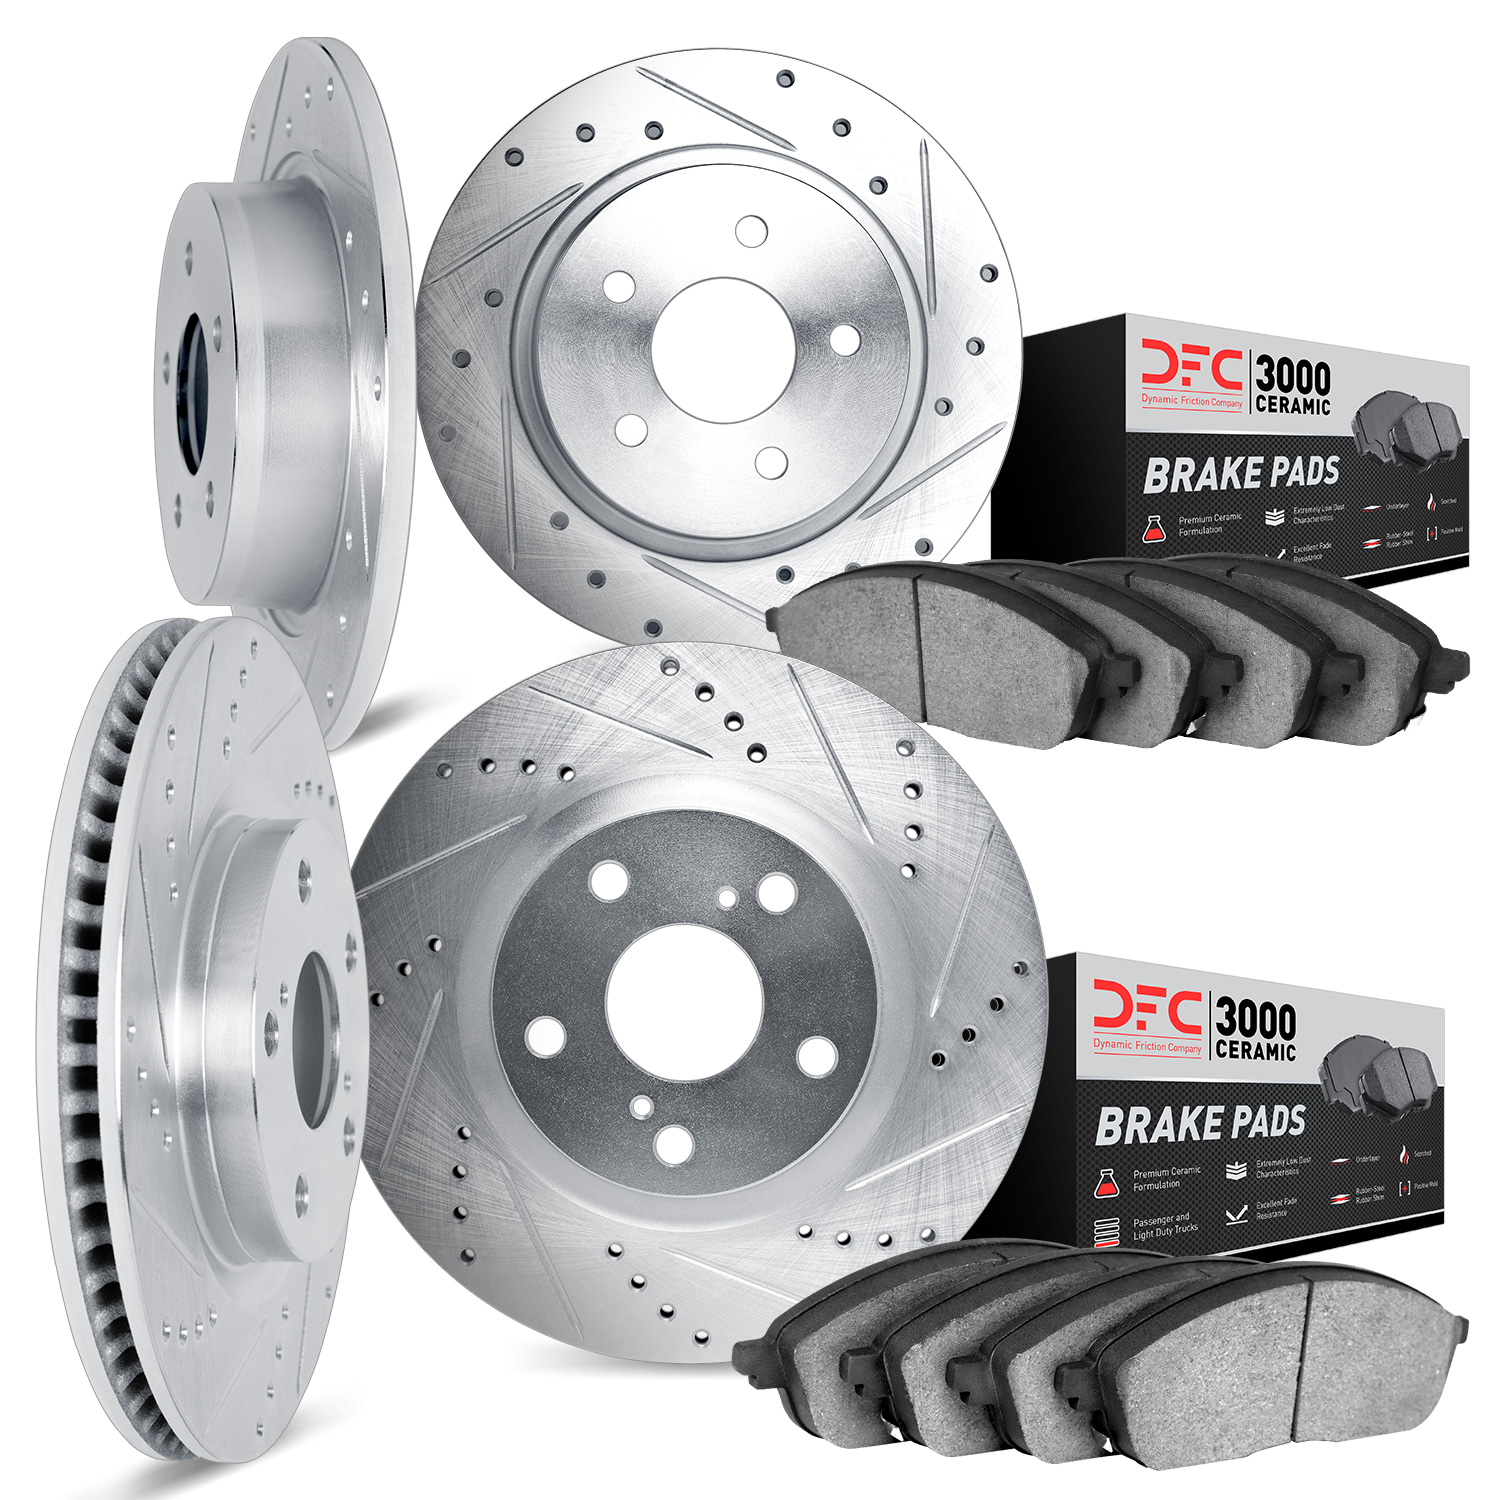 7304-13010 Drilled/Slotted Brake Rotor with 3000-Series Ceramic Brake Pads Kit [Silver], 1998-2002 Subaru, Position: Front and R